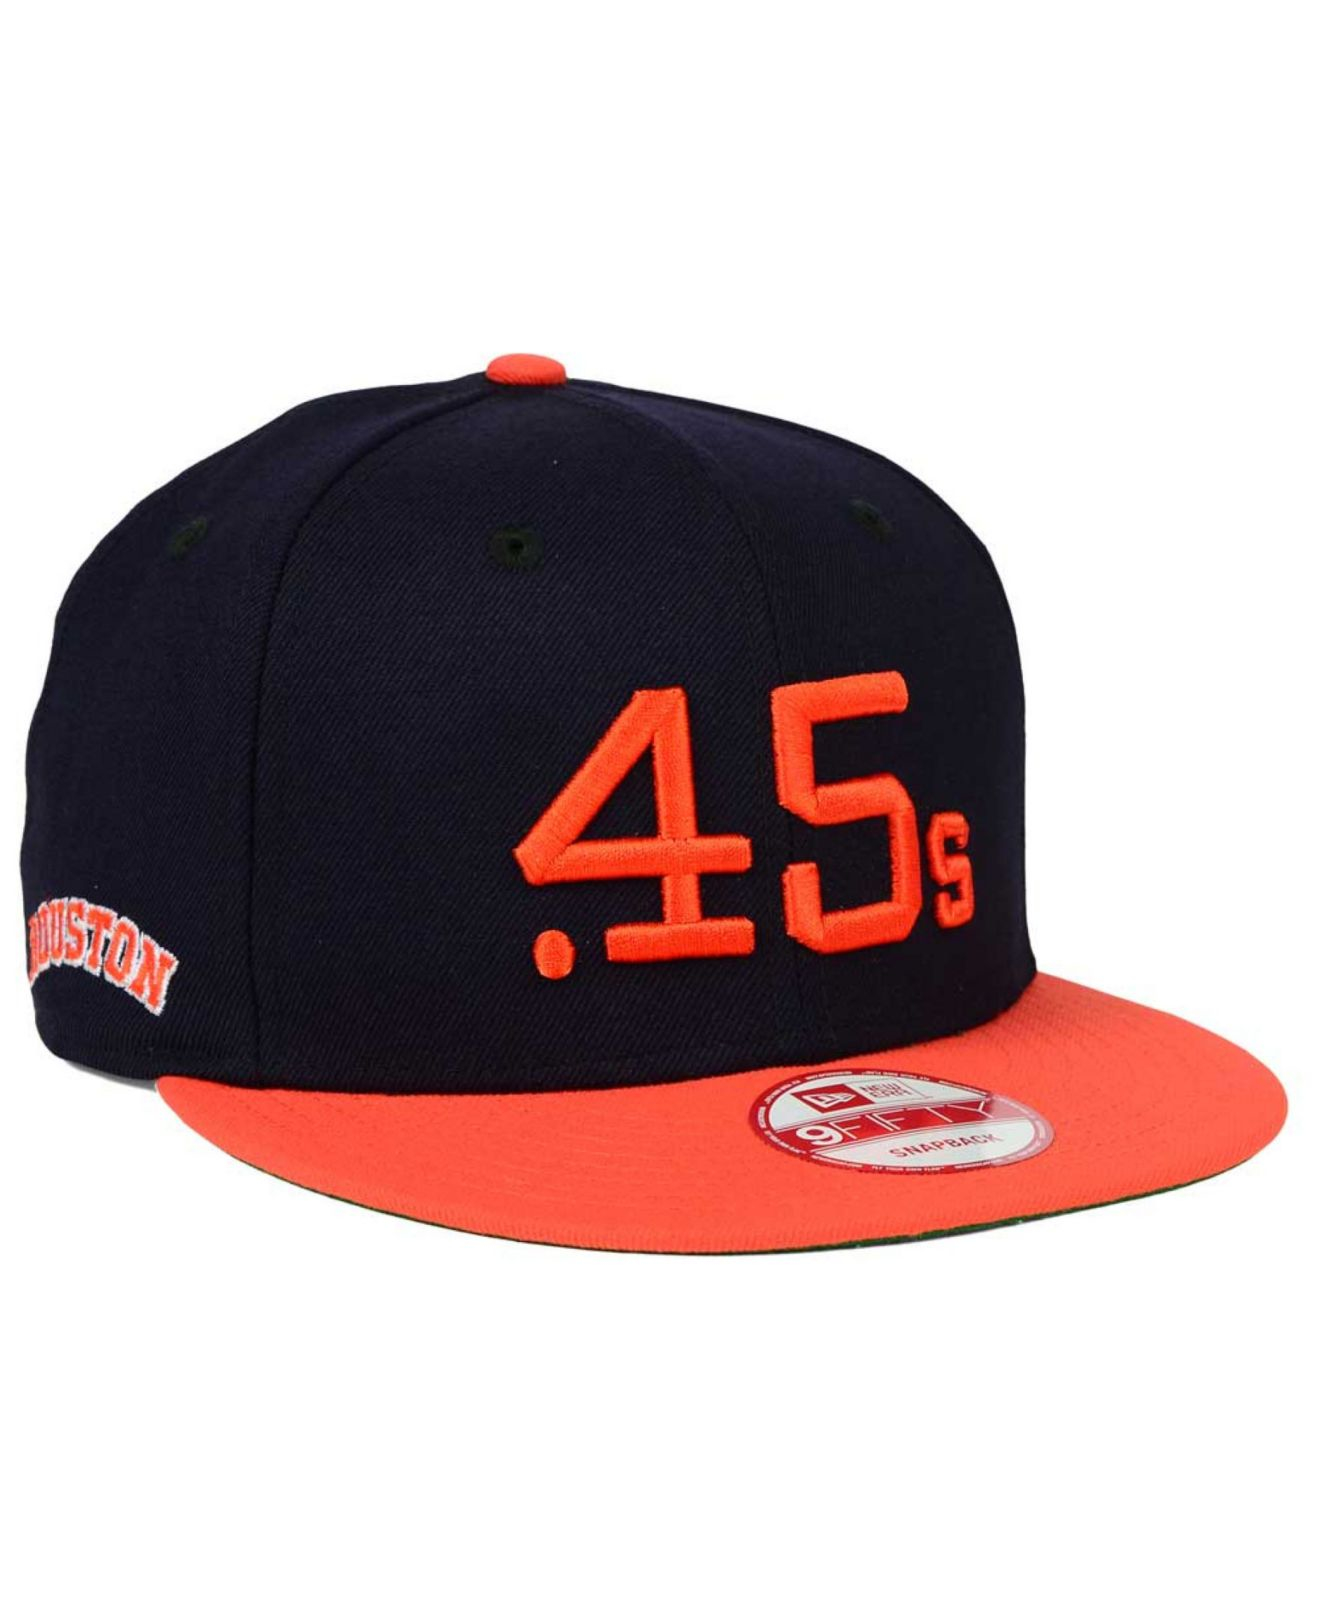 colt 45s jersey mitchell and ness